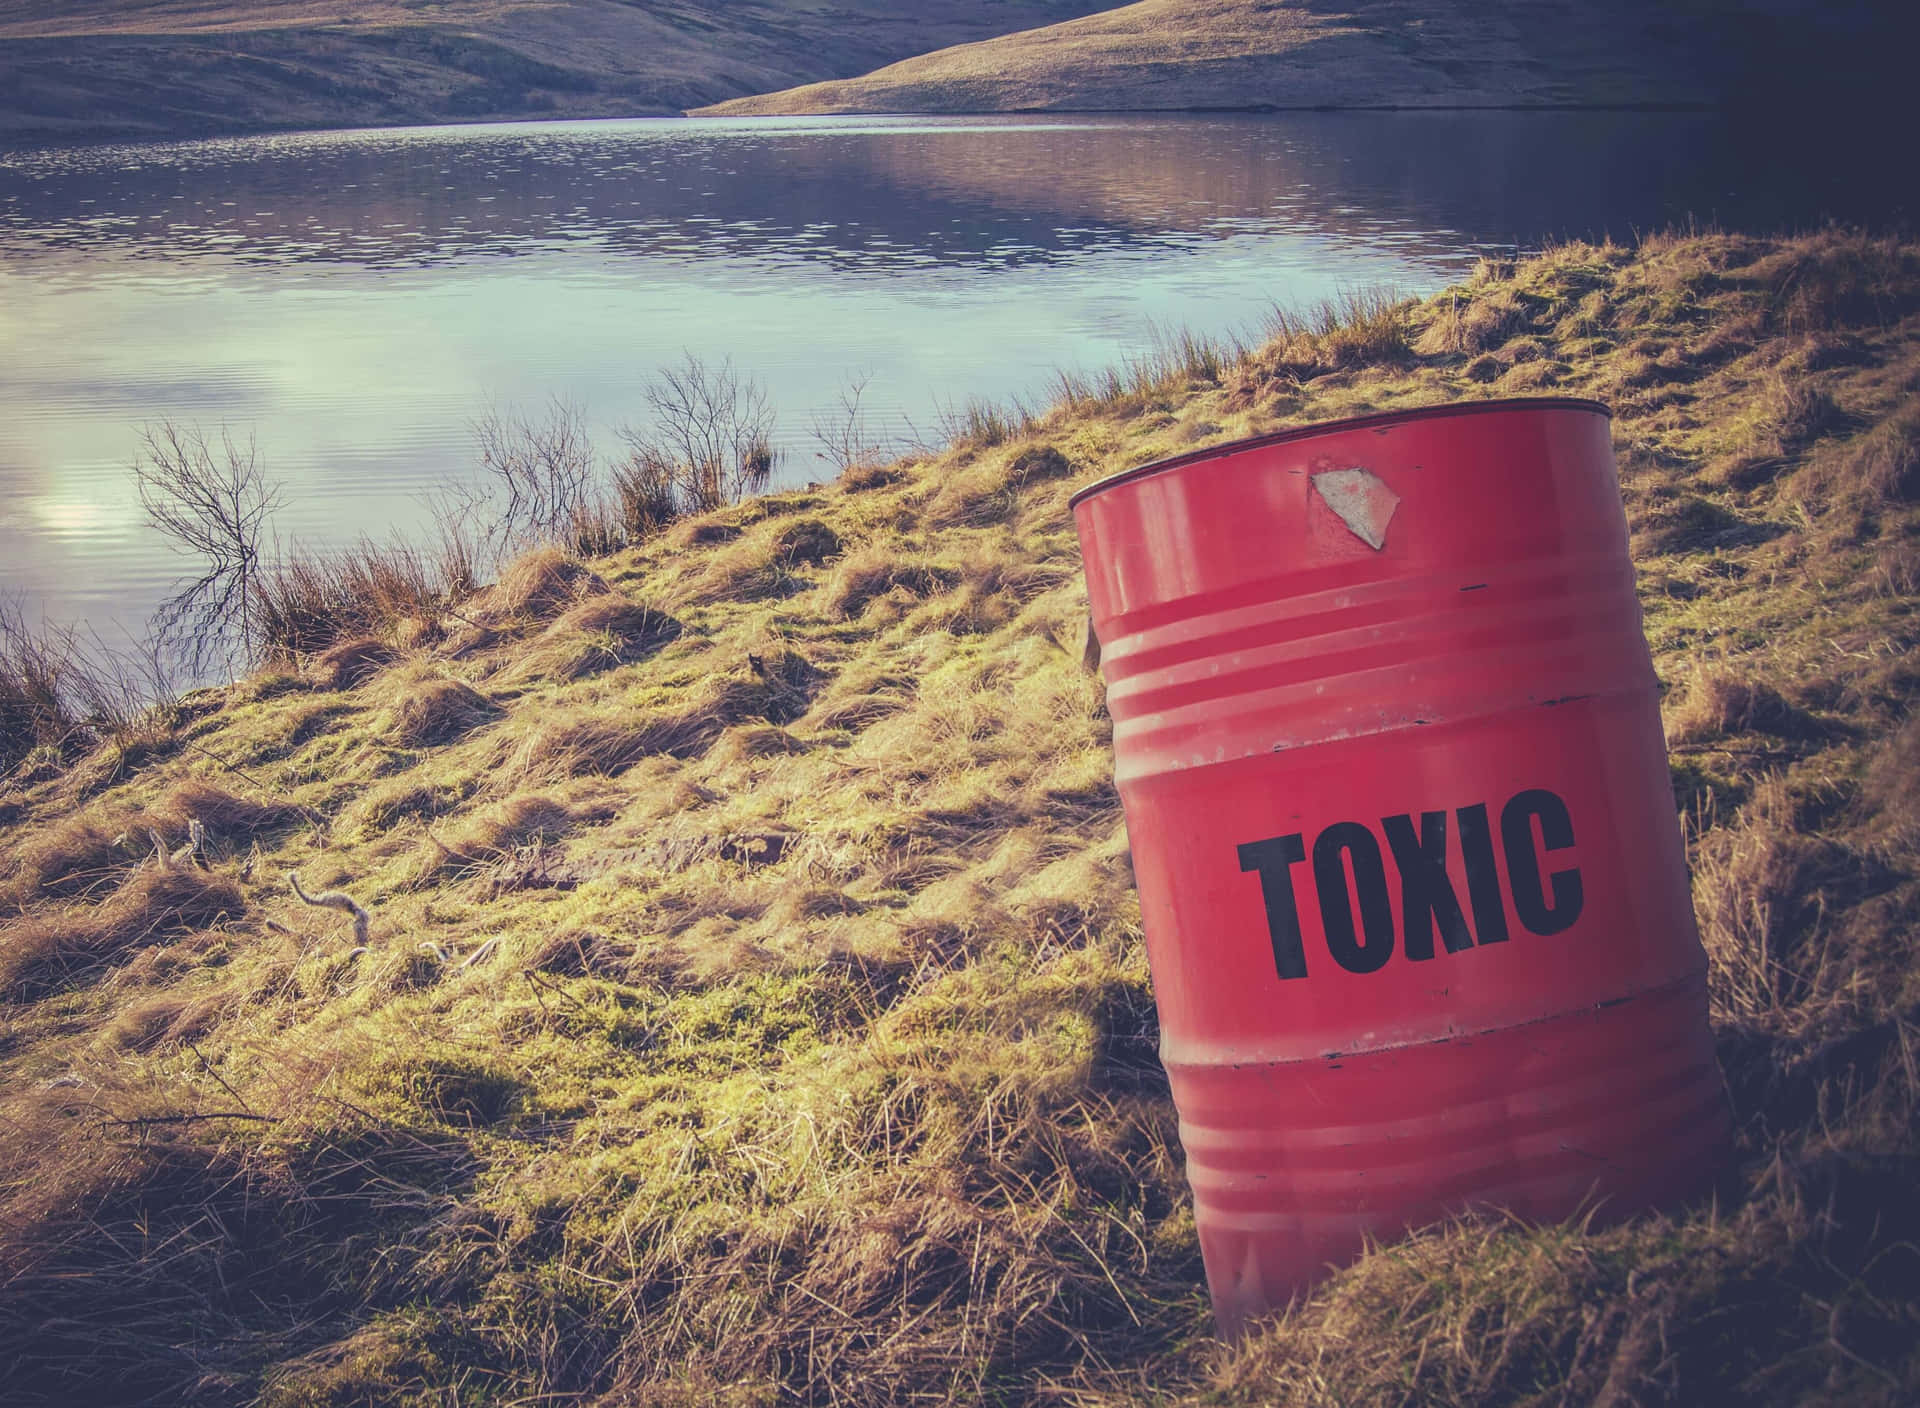 A Red Barrel With The Word Tonic On It